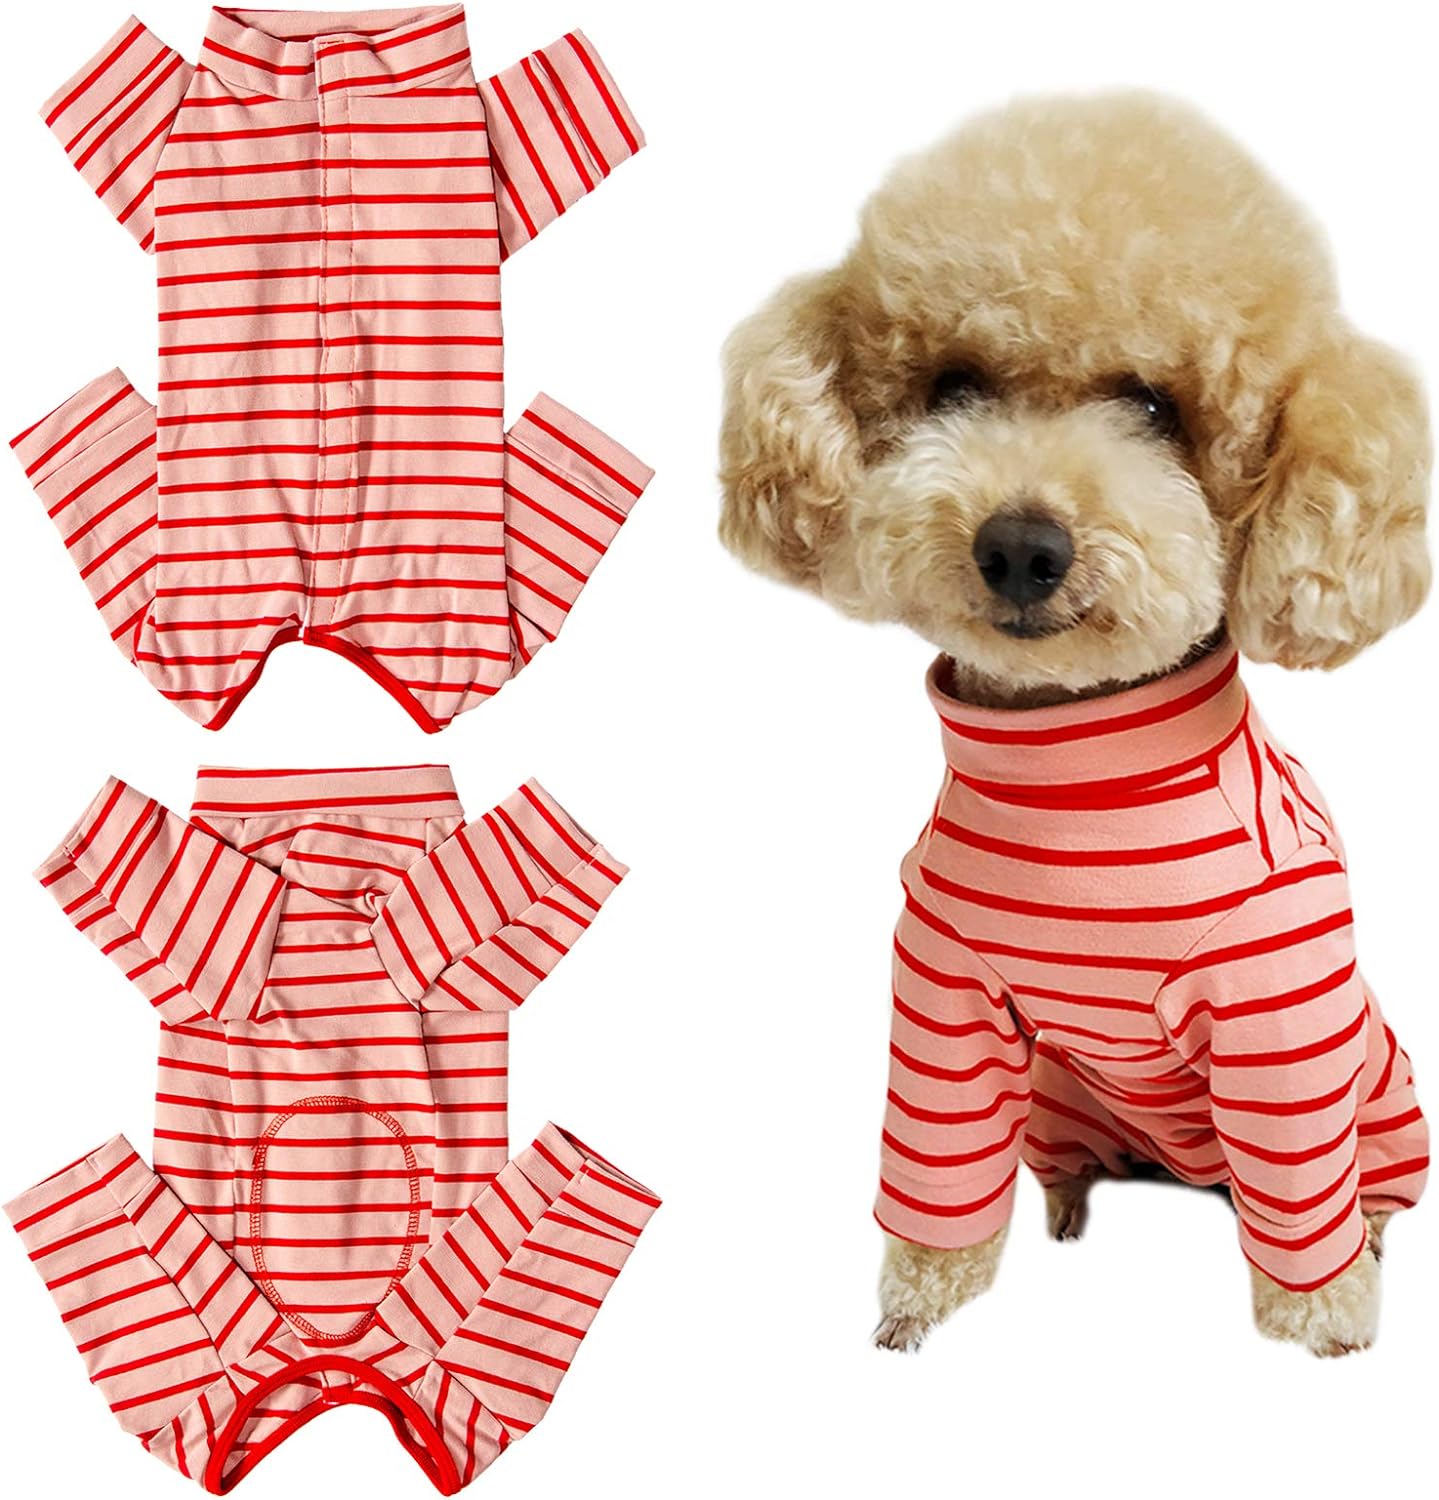 Dog’s Recovery Suit Post Surgery Shirt for Puppy, Full Coverage Dog's Bodysuit Wound Protective Surgical Clothes for Small and Medium Pets (red Pink Stripe-l)